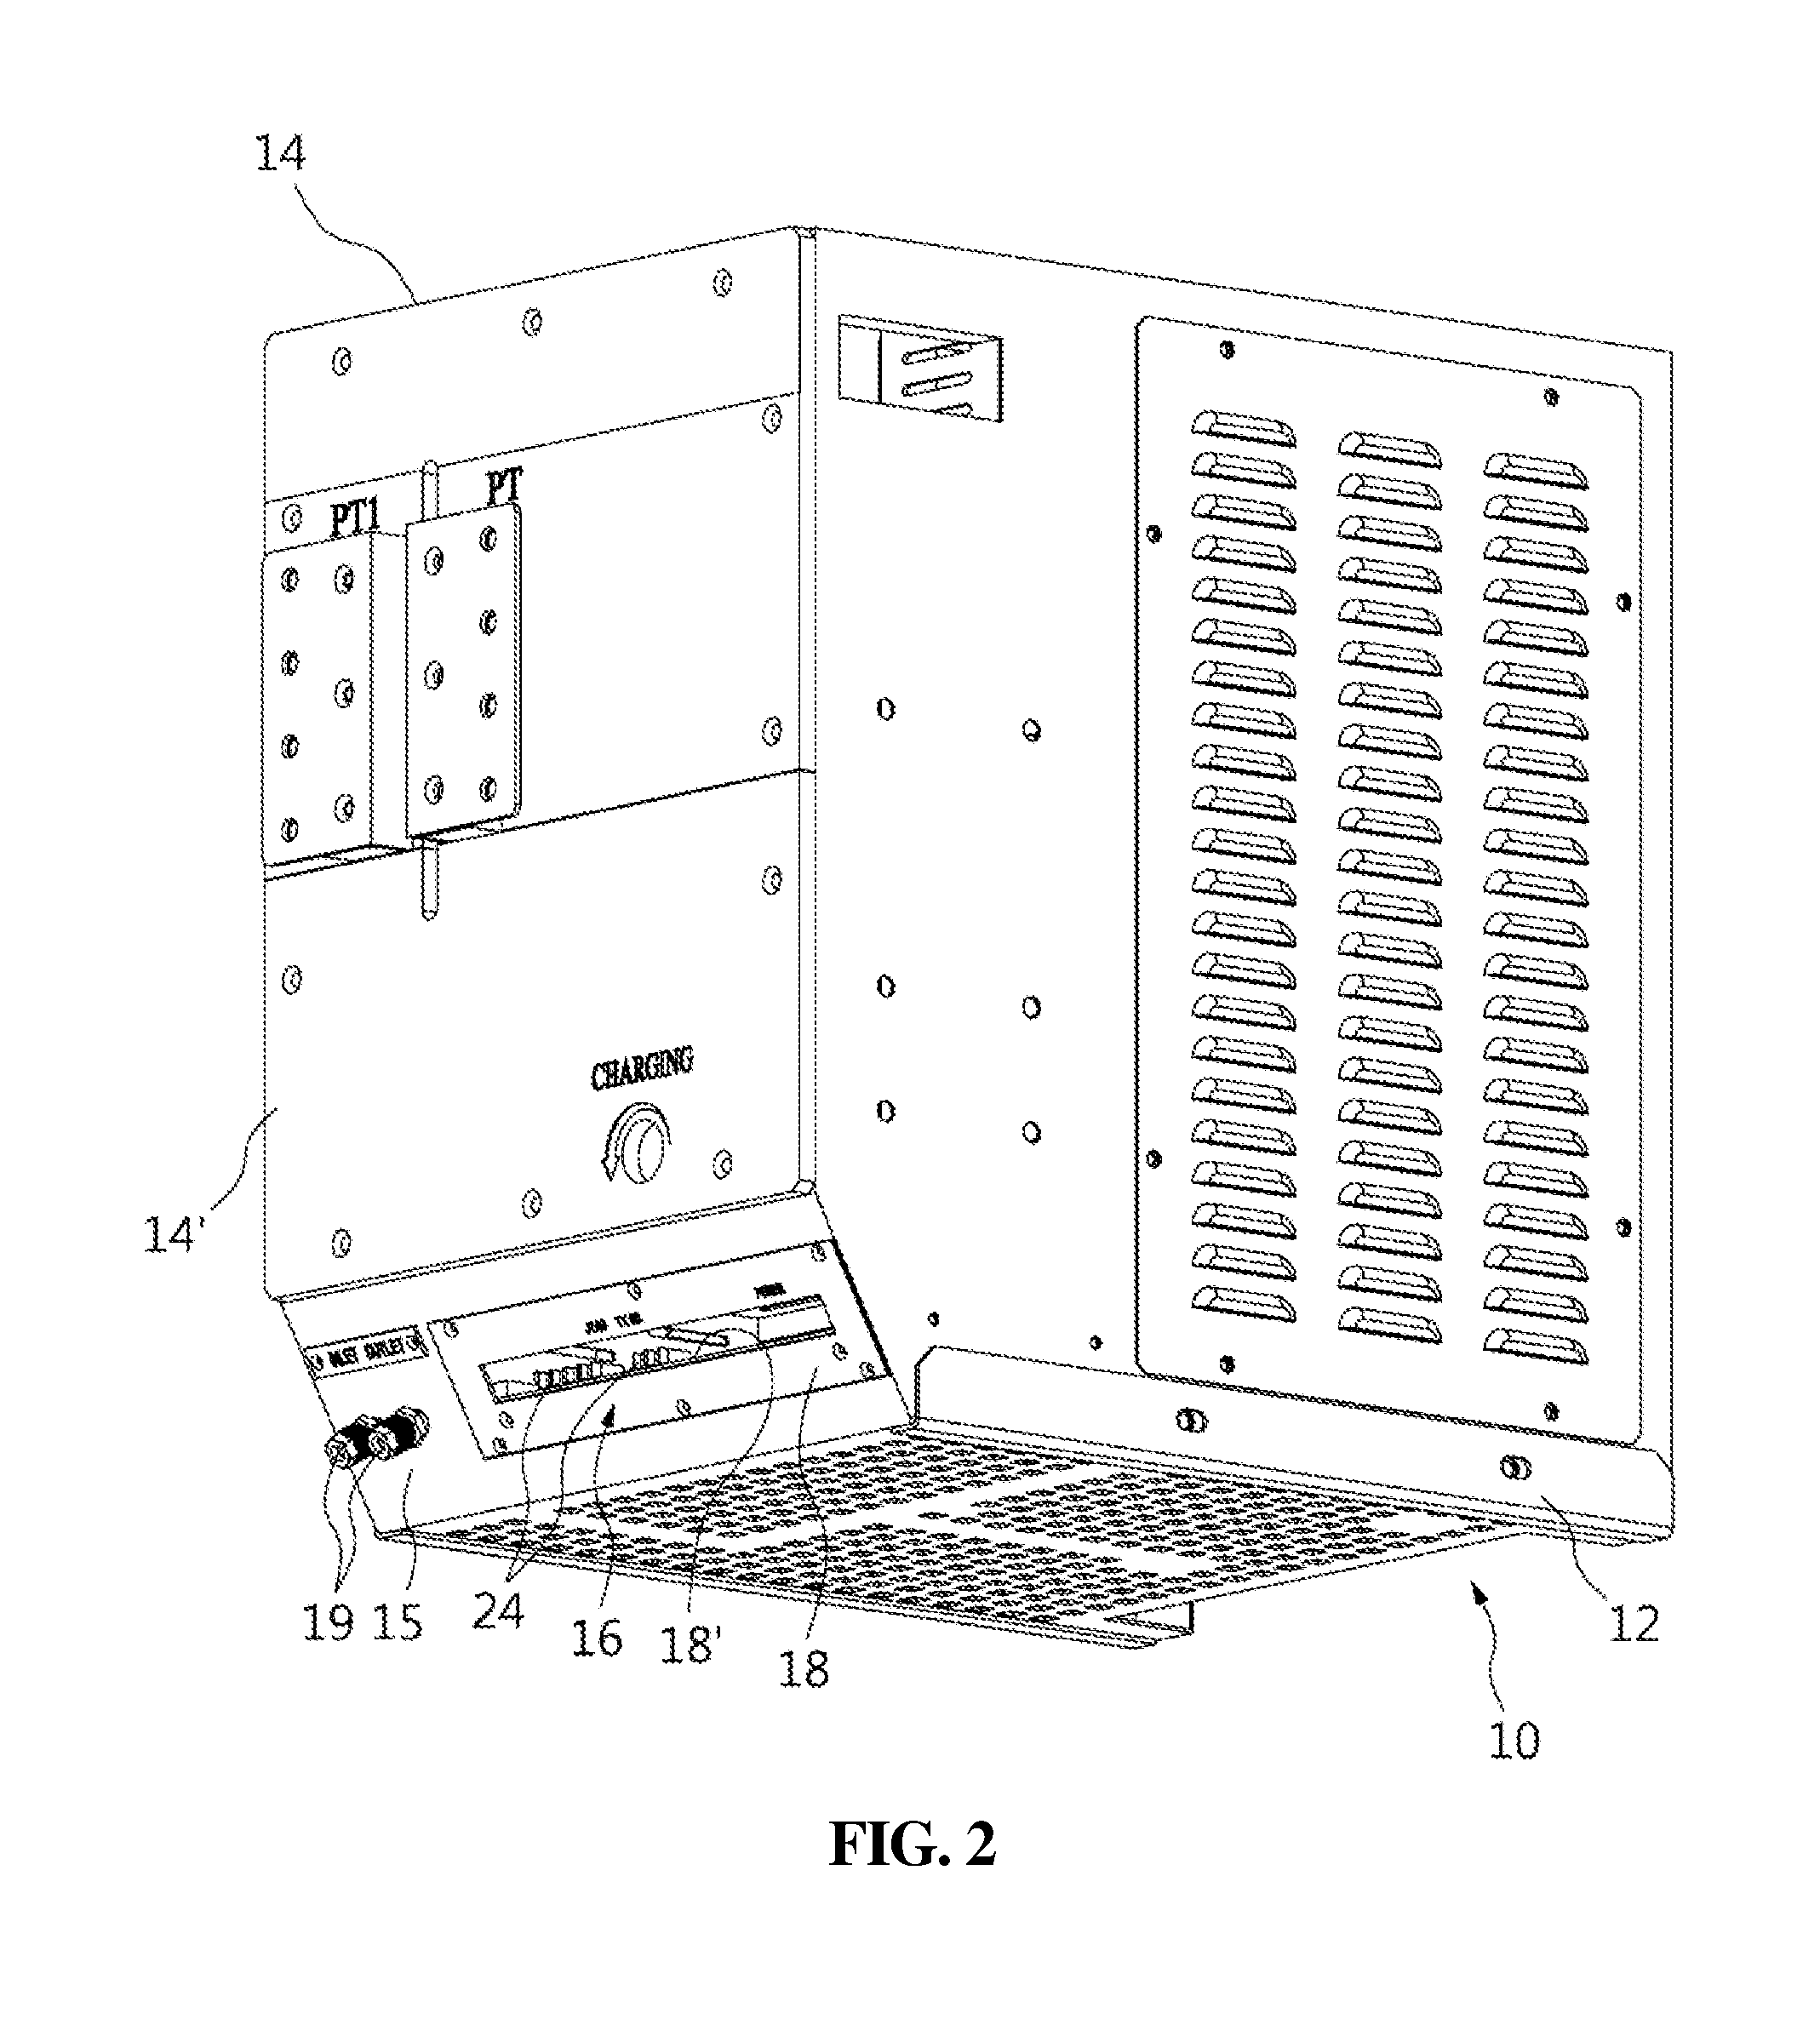 Modular apparatus for high voltage direct-current transmission system